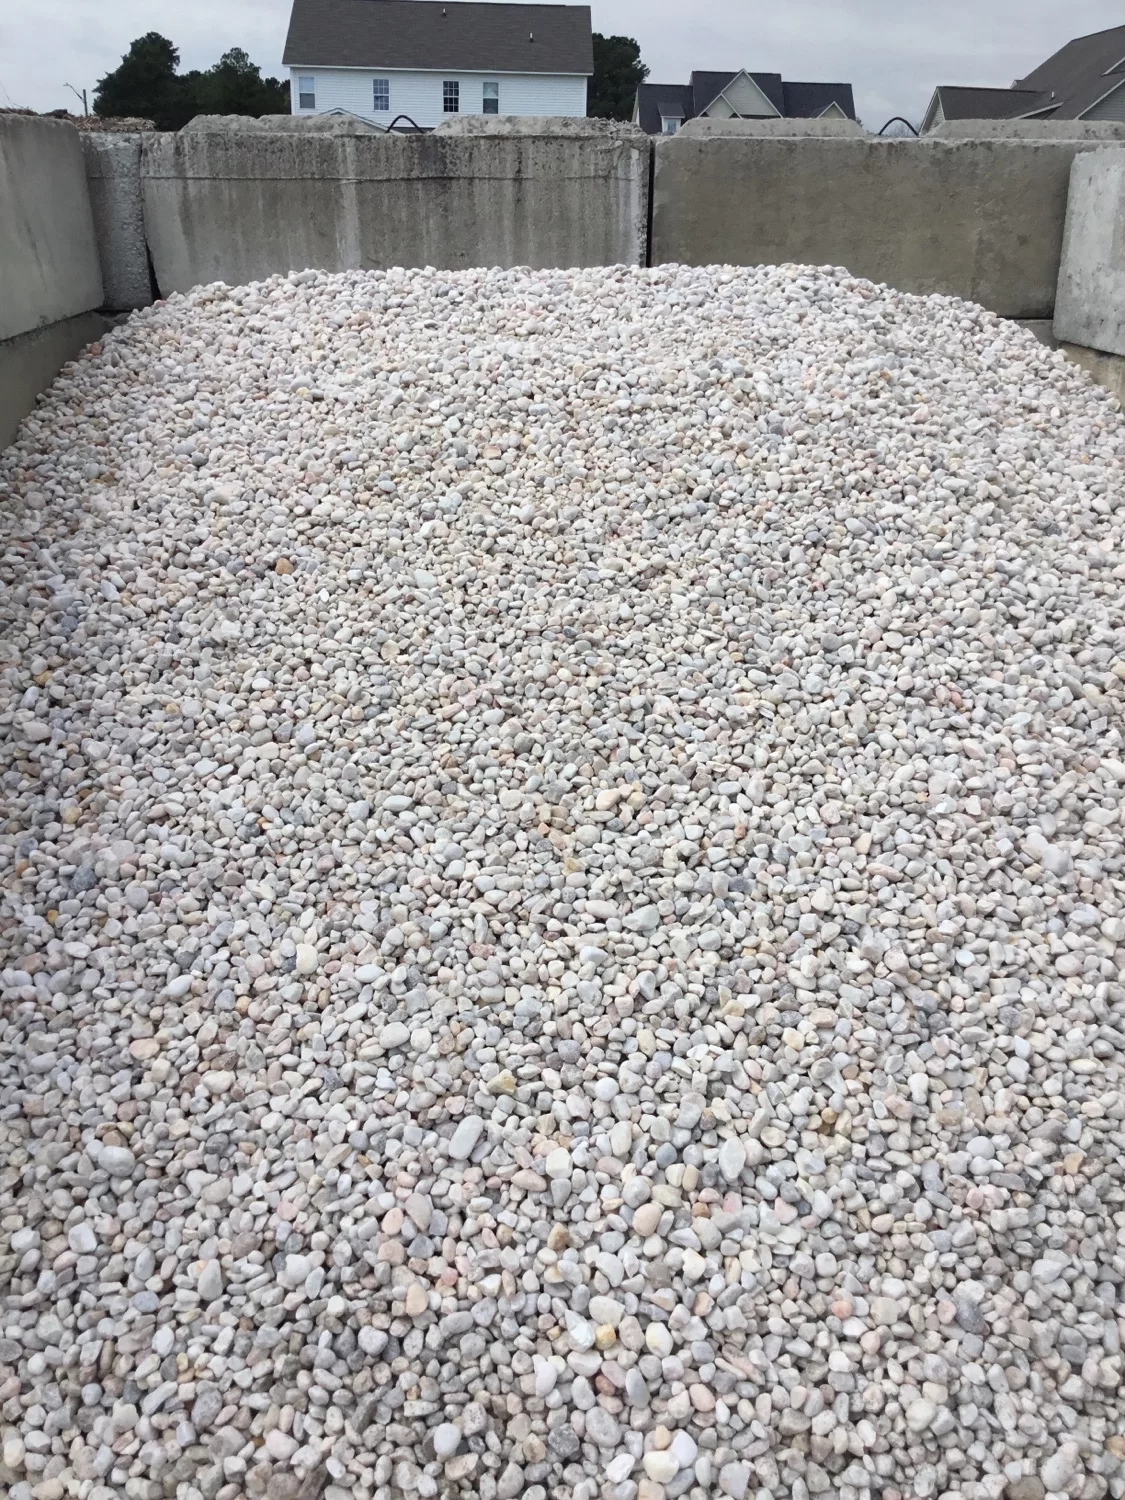 White River Rock Delivery Available, White Gravel Landscaping